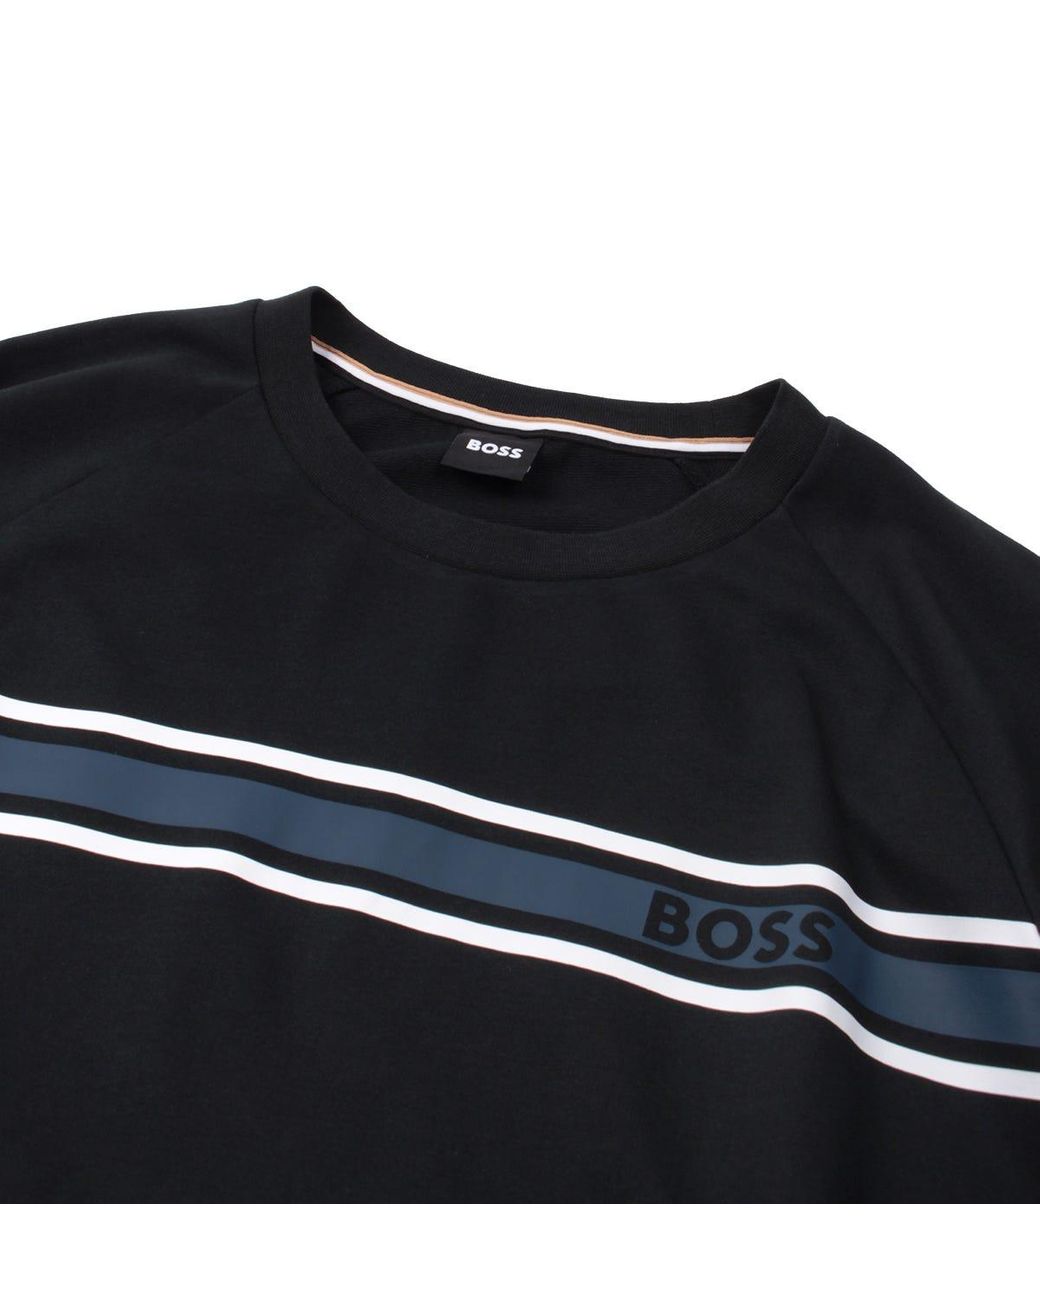 gym and workout clothes Sweatshirts BOSS by HUGO BOSS Bodywear Cotton Terry Crew Neck Sweatshirt & Shorts Lounge Set in Black for Men Mens Clothing Activewear 